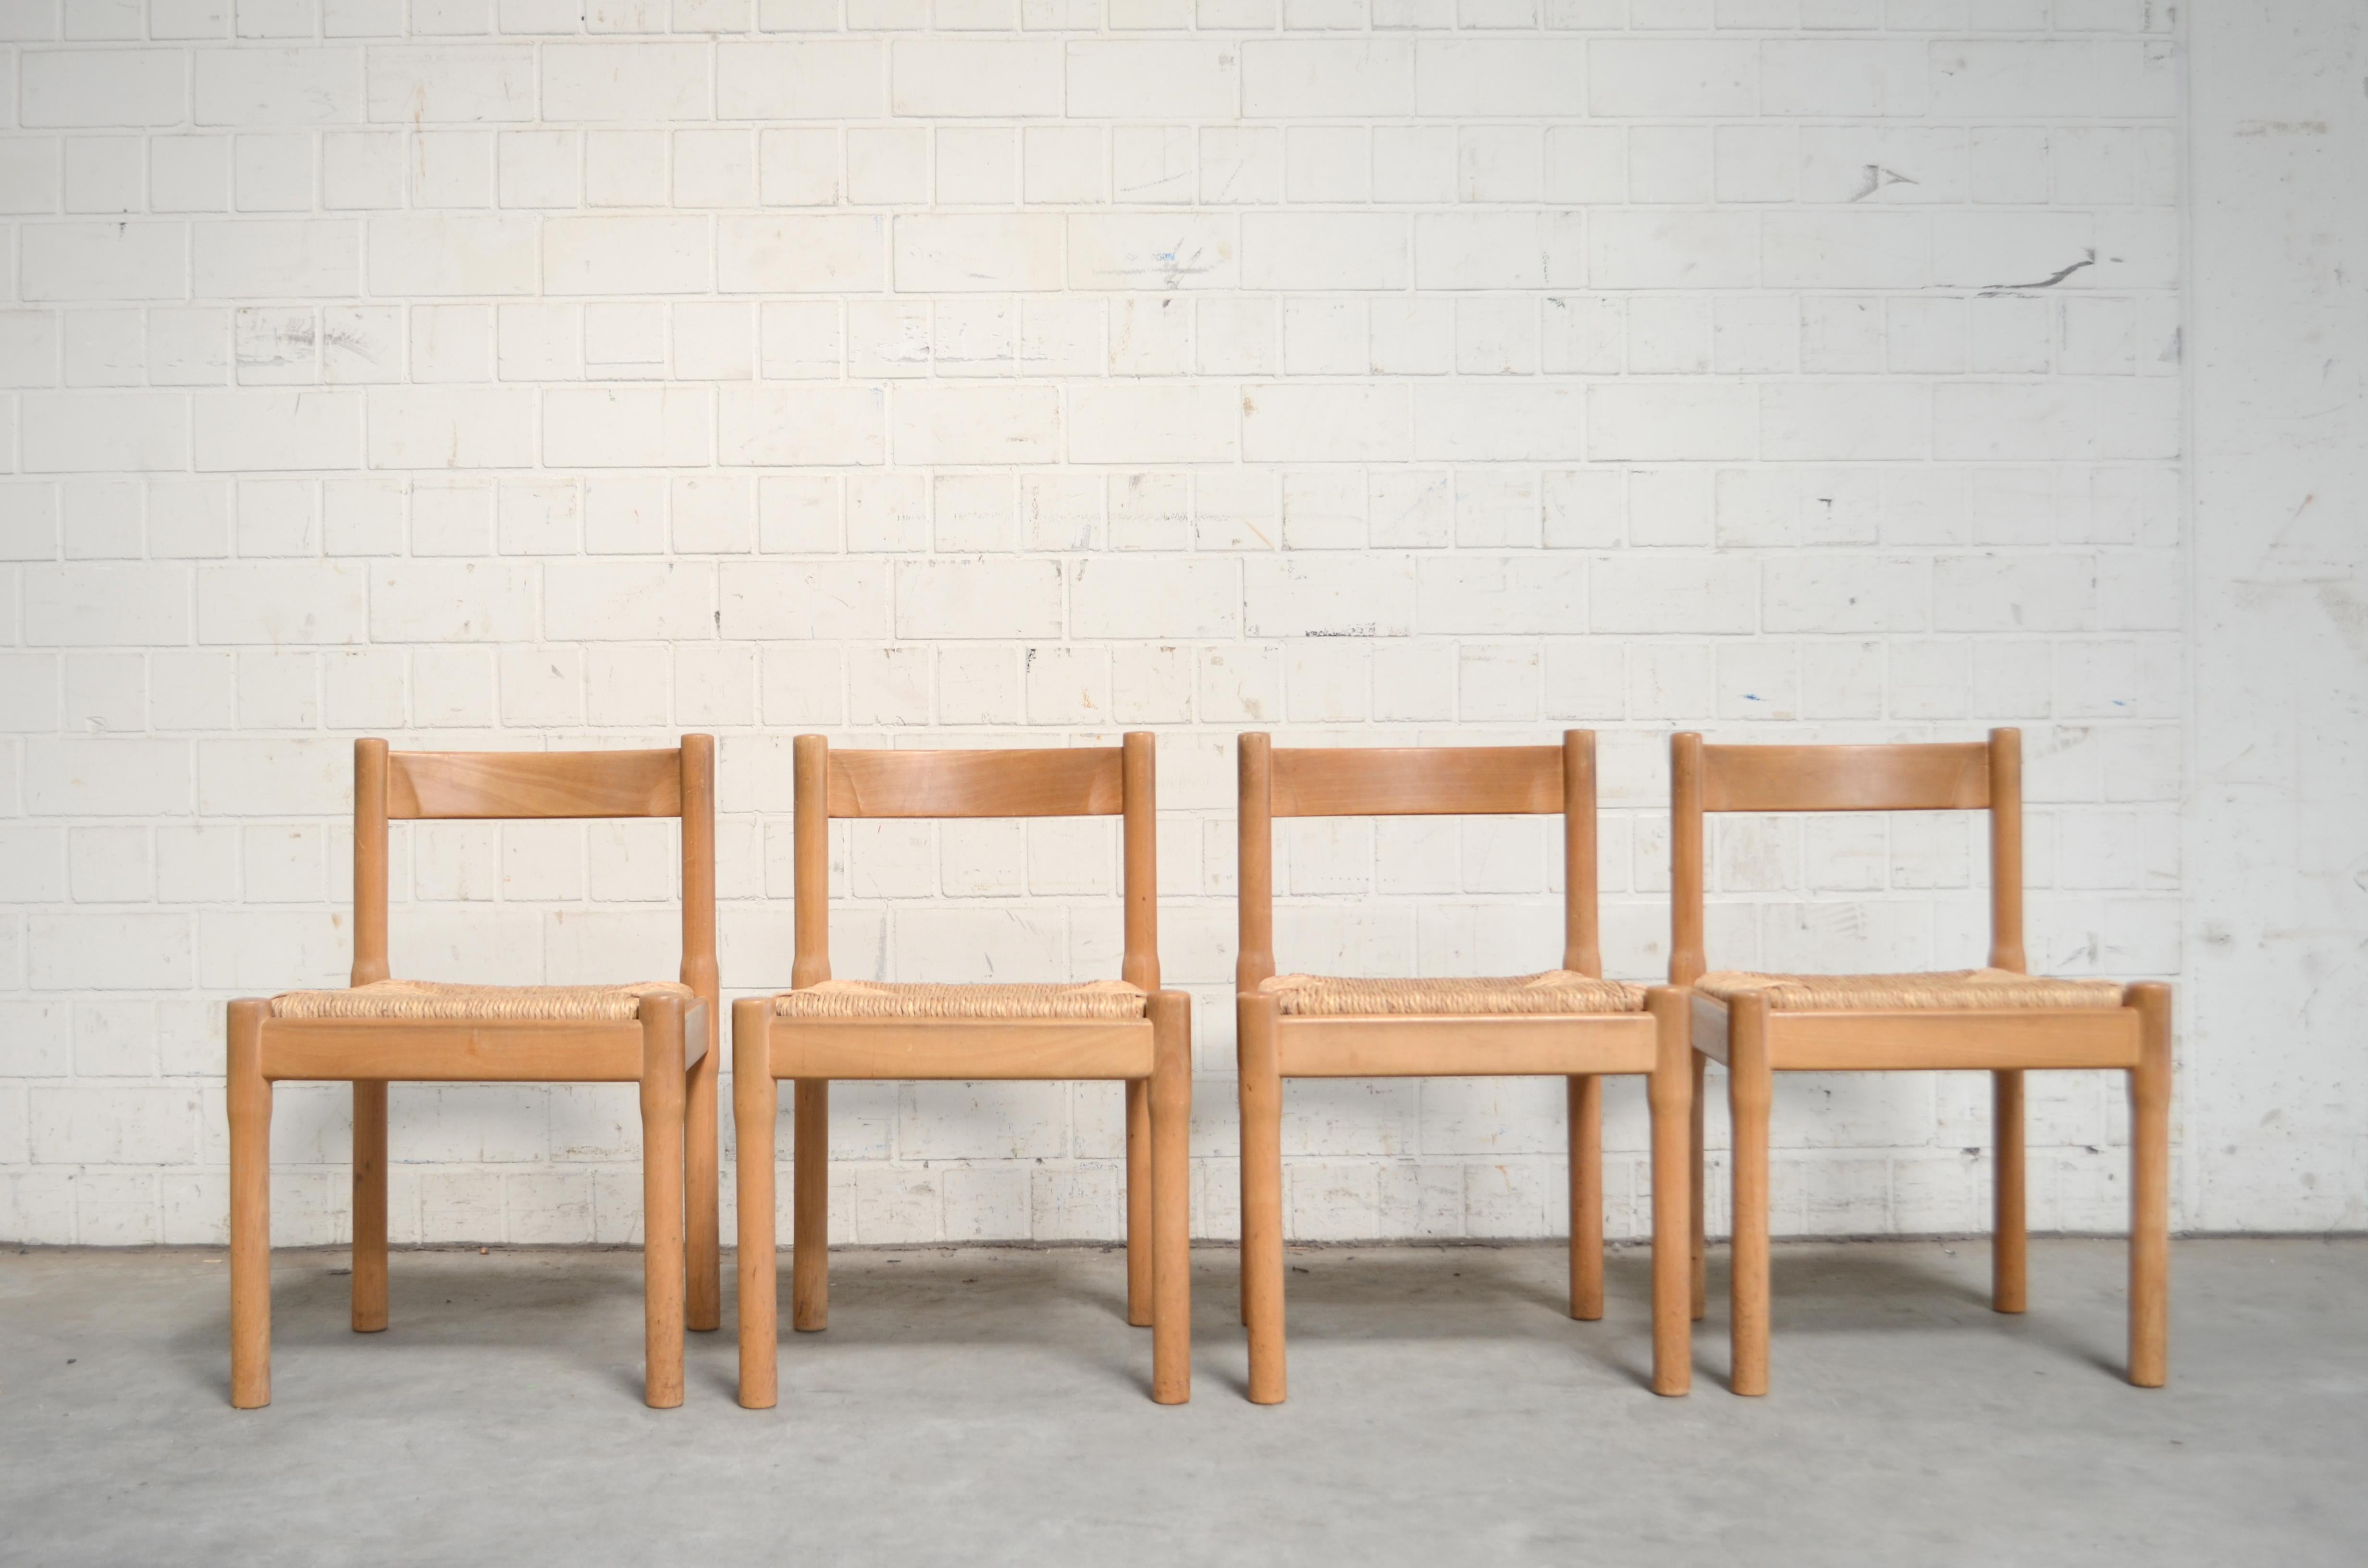 Cassina Model Carimate chair by Vico Magistretti.
Comfortable dining chairs. Made of beechwood and papercord.
Set of 4.
 